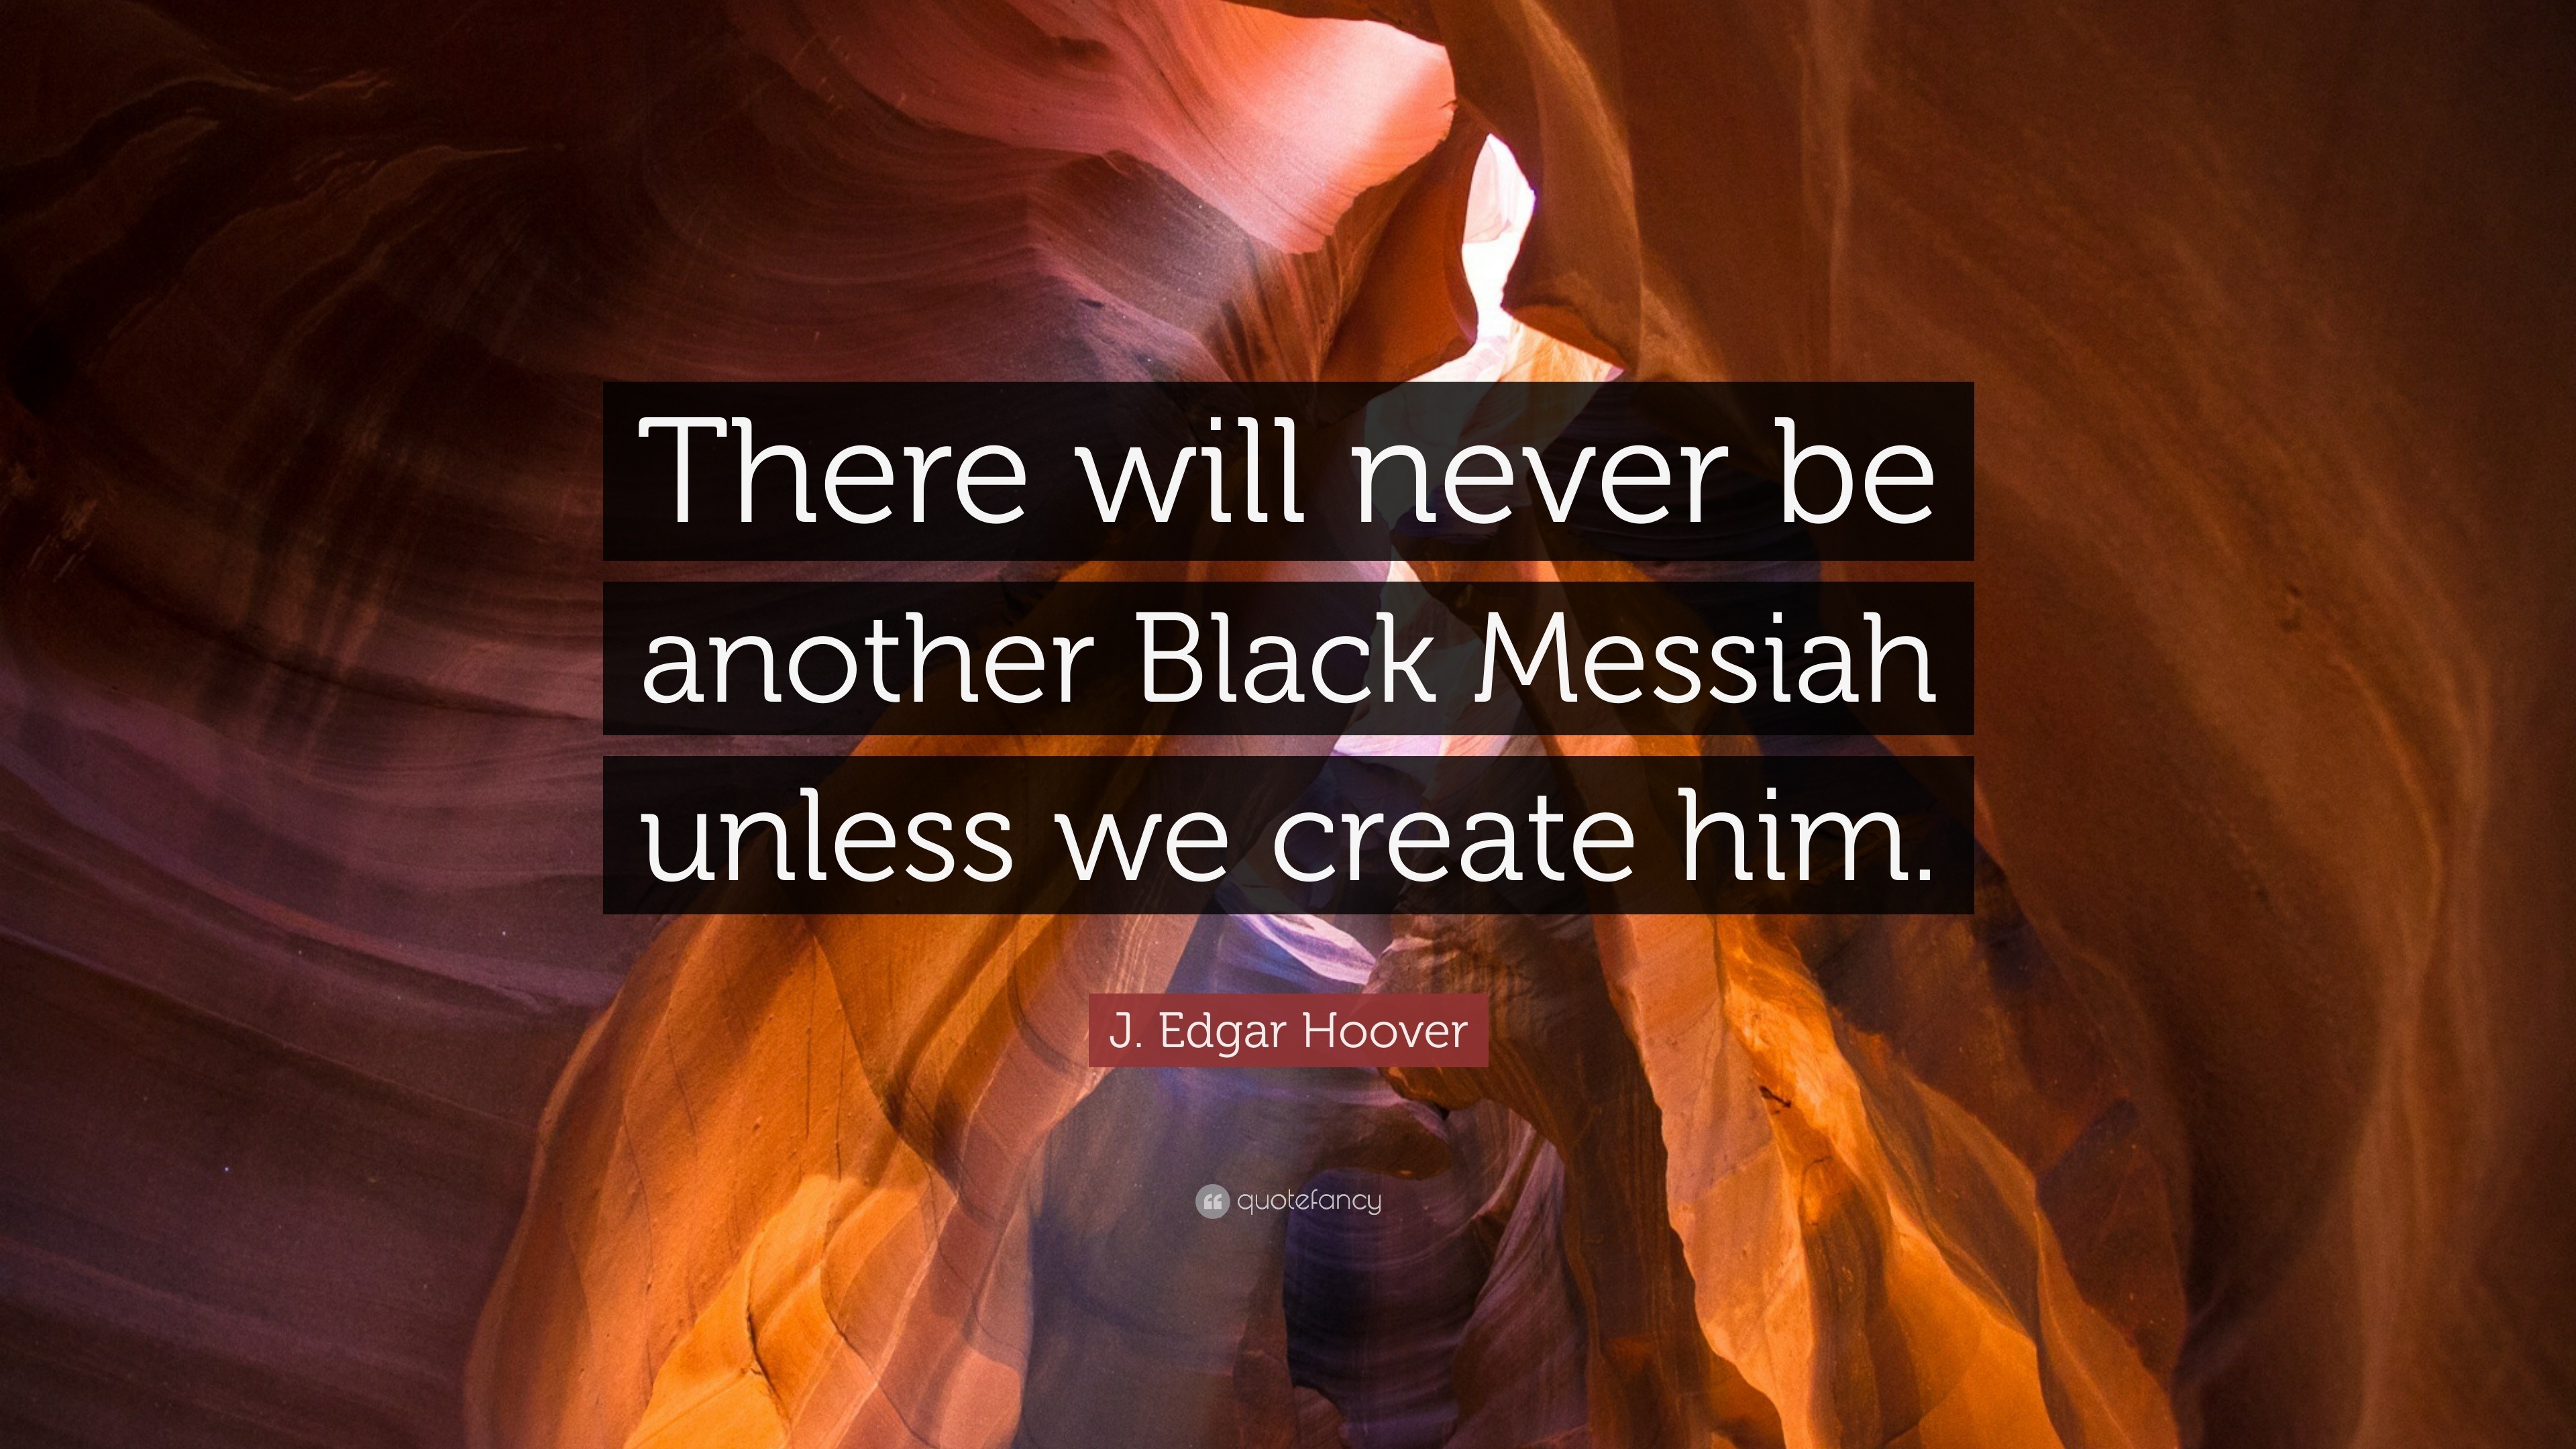 J. Edgar Hoover Quote: “There will never be another Black Messiah